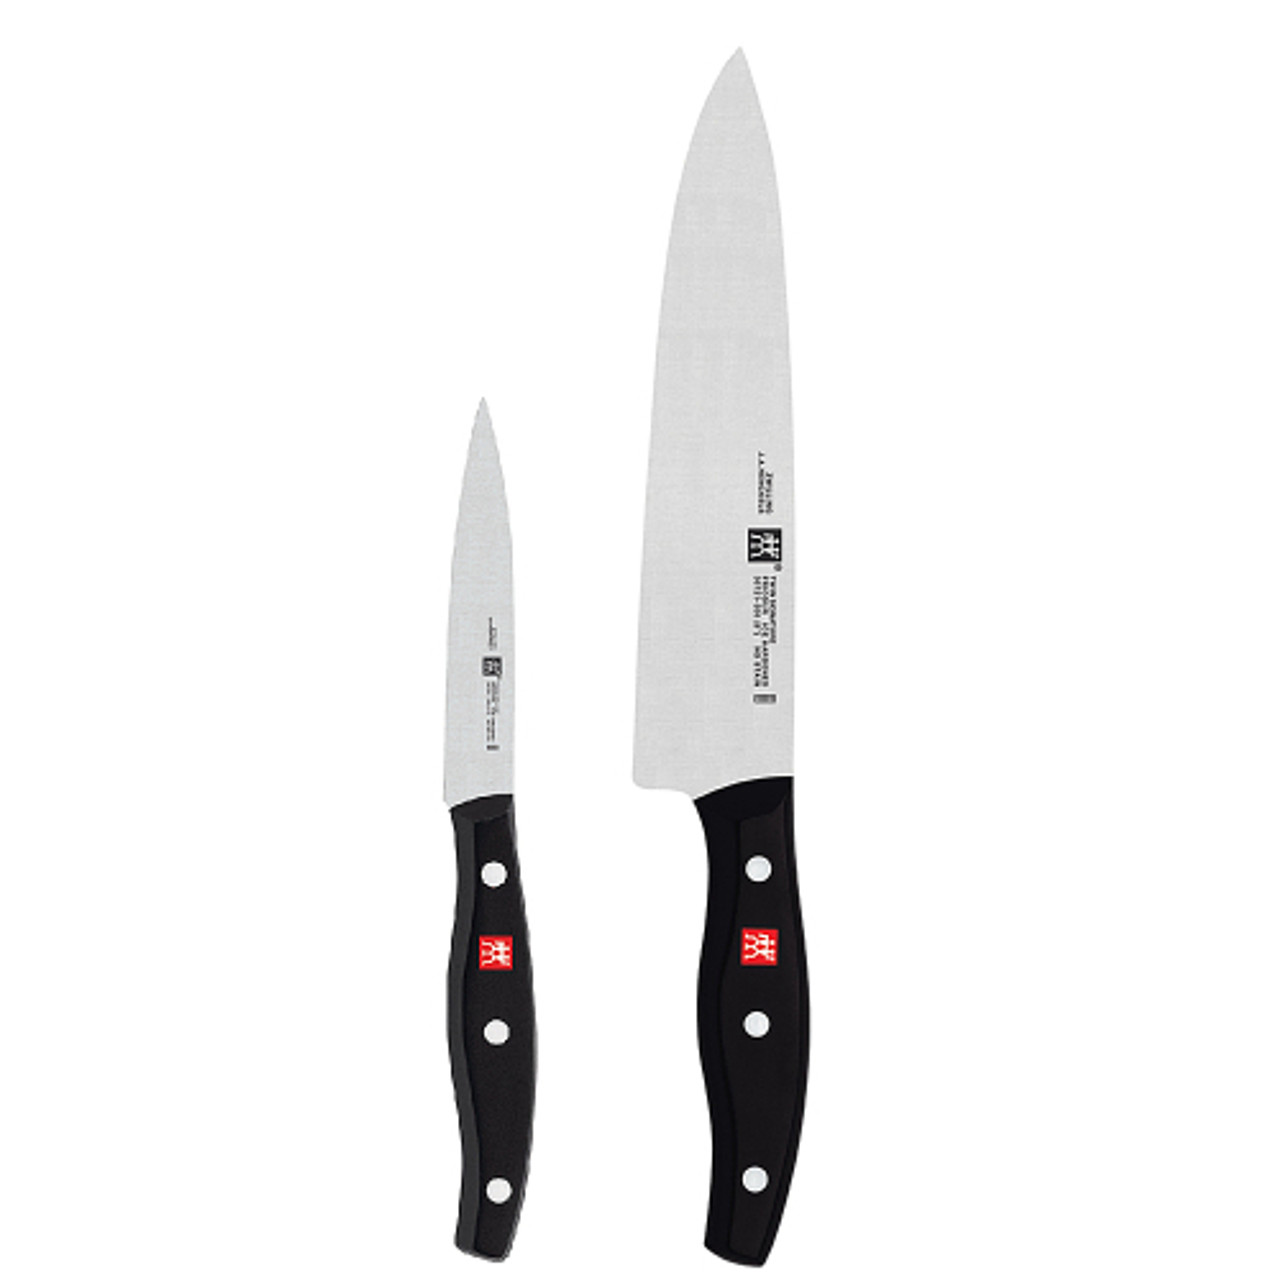 ZWILLING TWIN Signature "The Must Haves" 2-pc Knife Set - Black